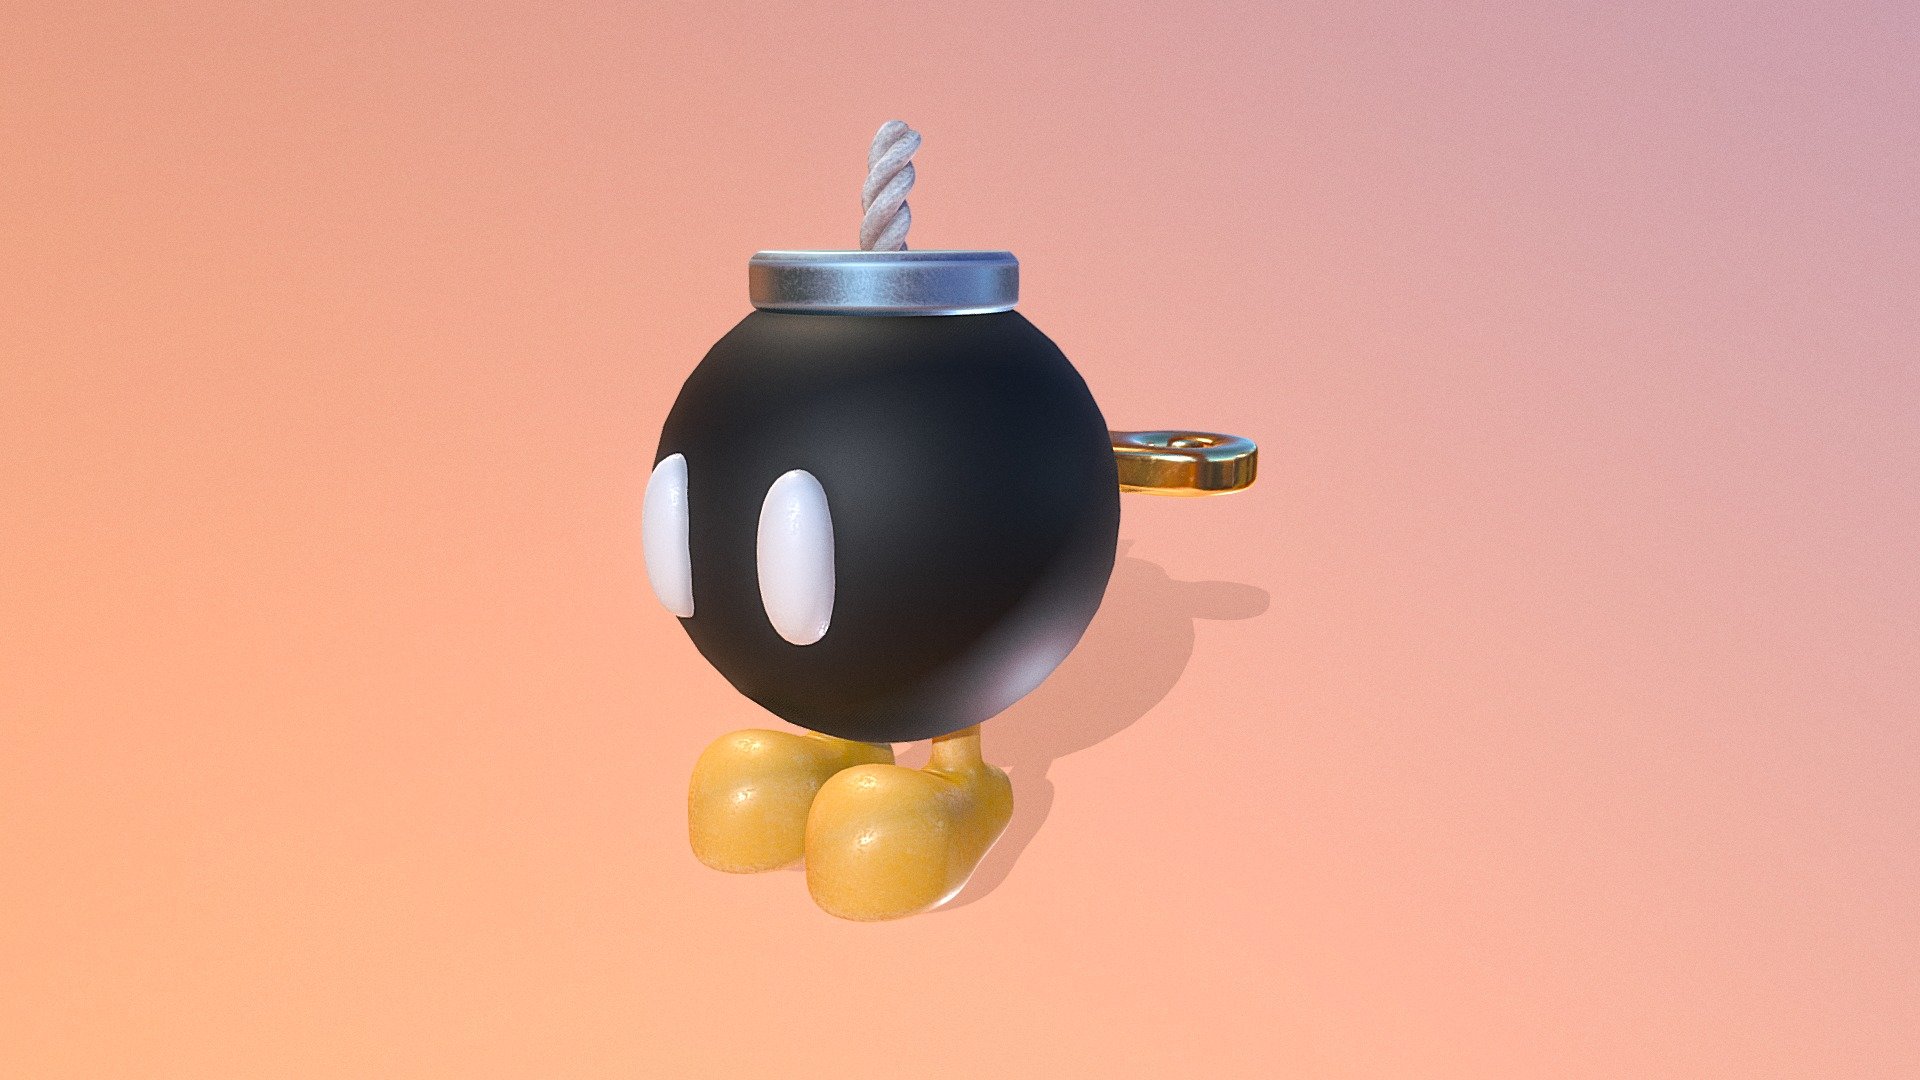 Imagine a tiny mechanical creature, no bigger than an apple. It has a round body, painted in a glossy jet-black color that gleams under the light. Two wide, innocent eyes stare out from its face, giving it an almost comical appearance. But don’t be fooled! This is no ordinary creature; this is a Bob-omb from the world of Mario 3d model